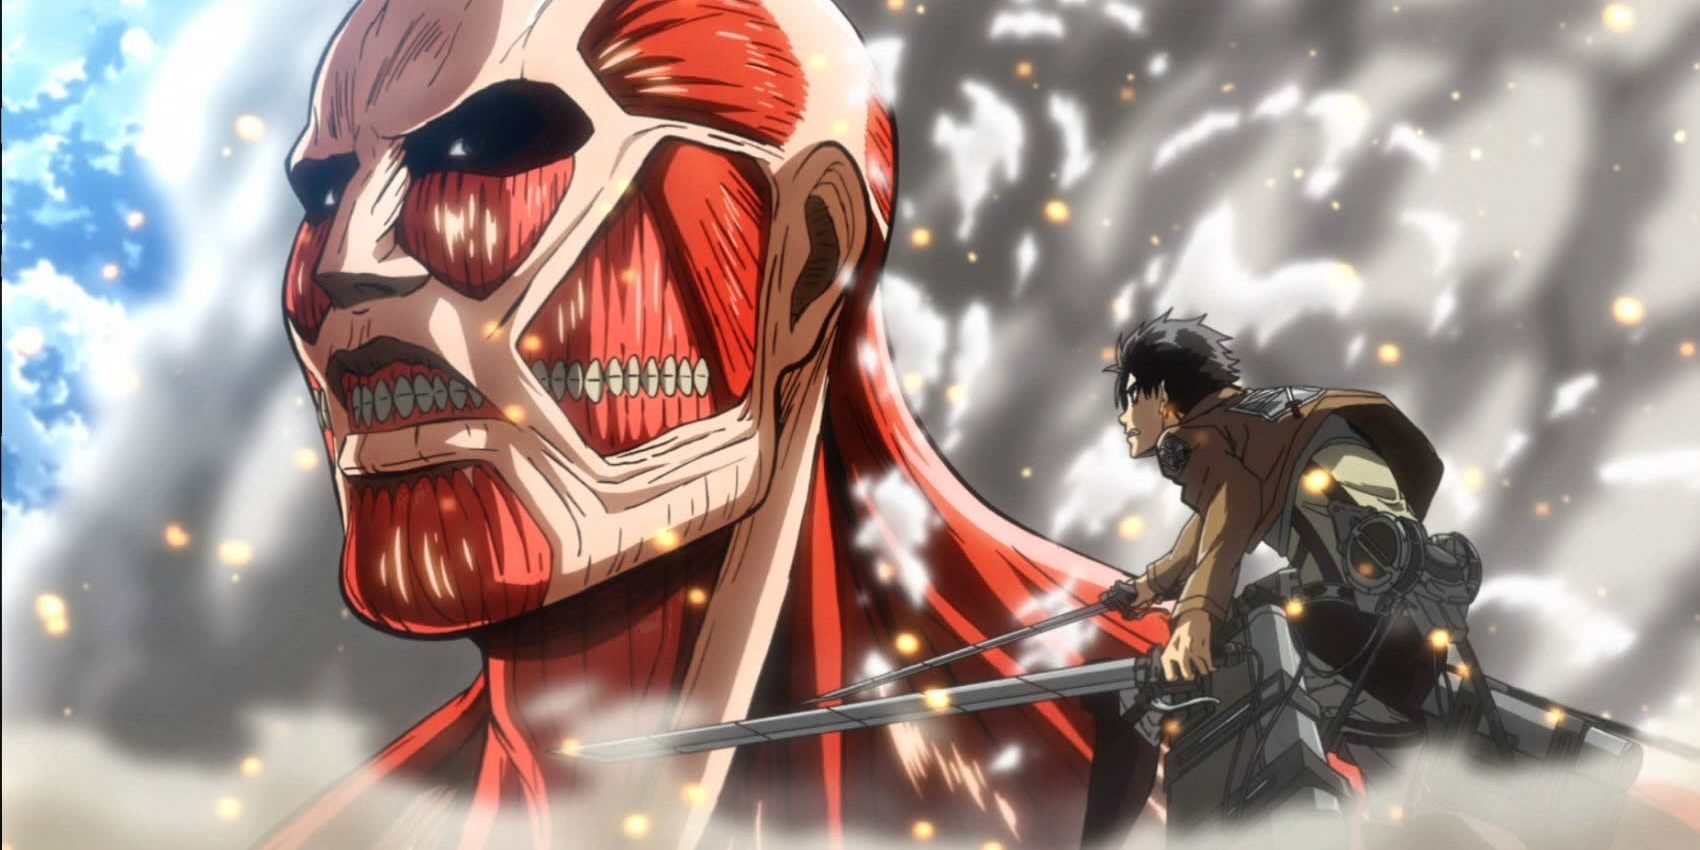 attack-on-titan-defined-quality-anime-for-nearly-a-decade-4749787